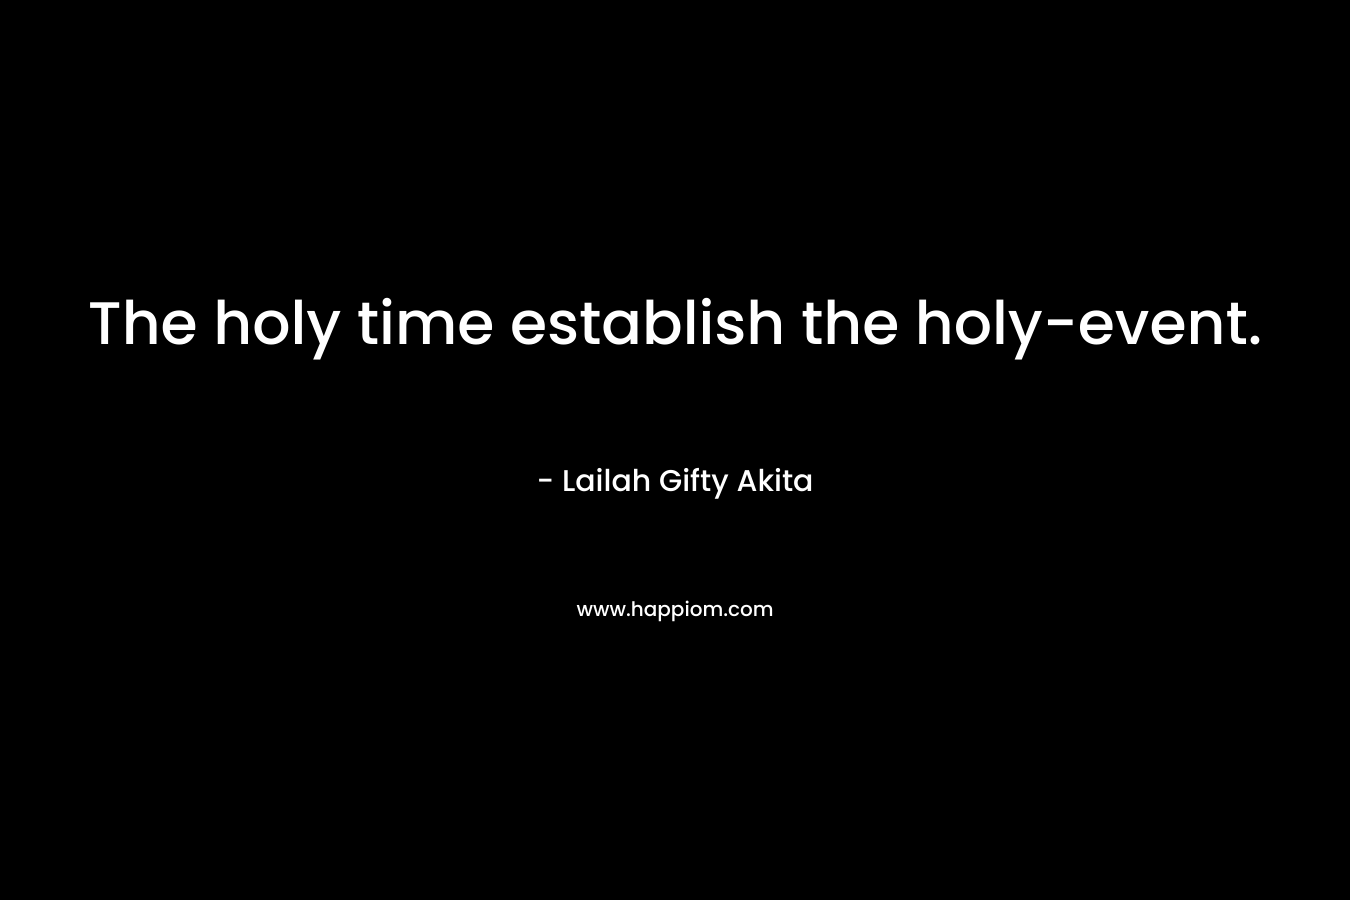 The holy time establish the holy-event.